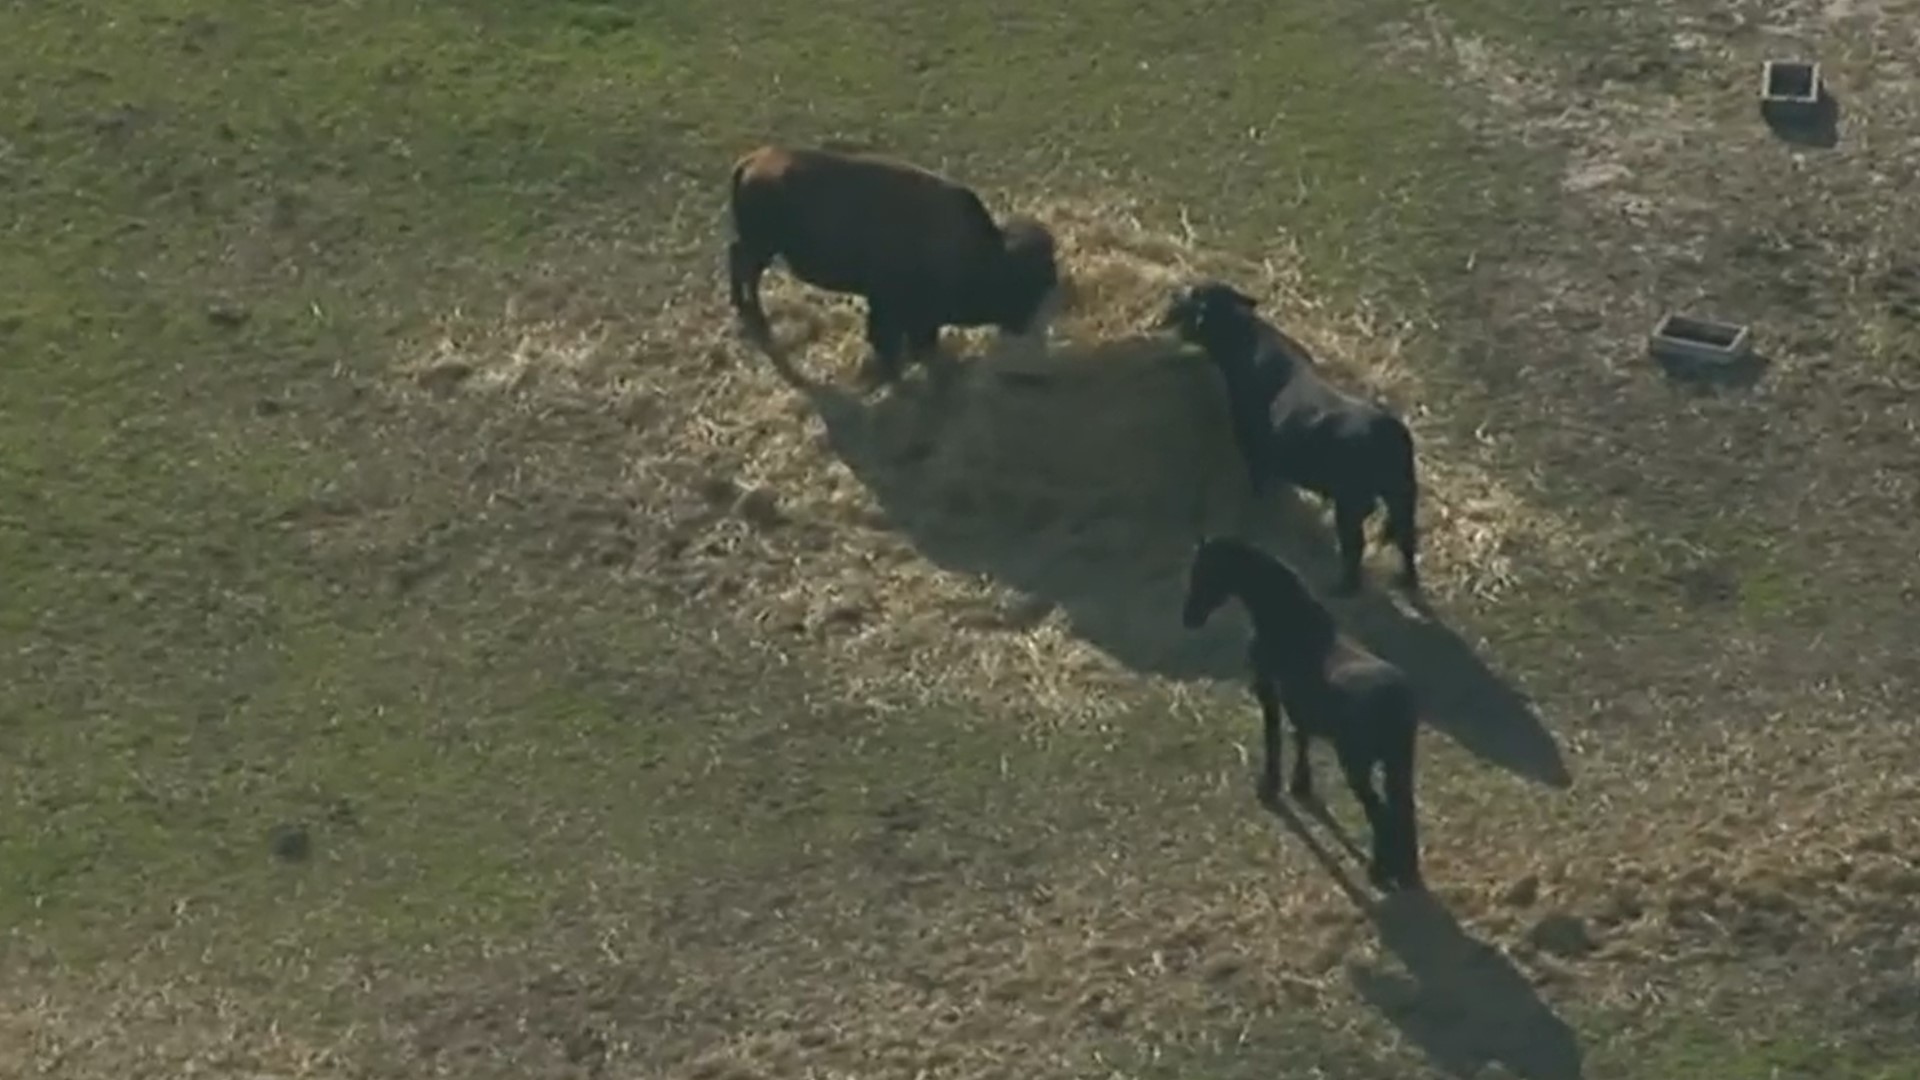 11Alive SkyTracker flew over Rick Ross' mansion in Fayetteville, Georgia Monday afternoon and spotted the buffaloes.